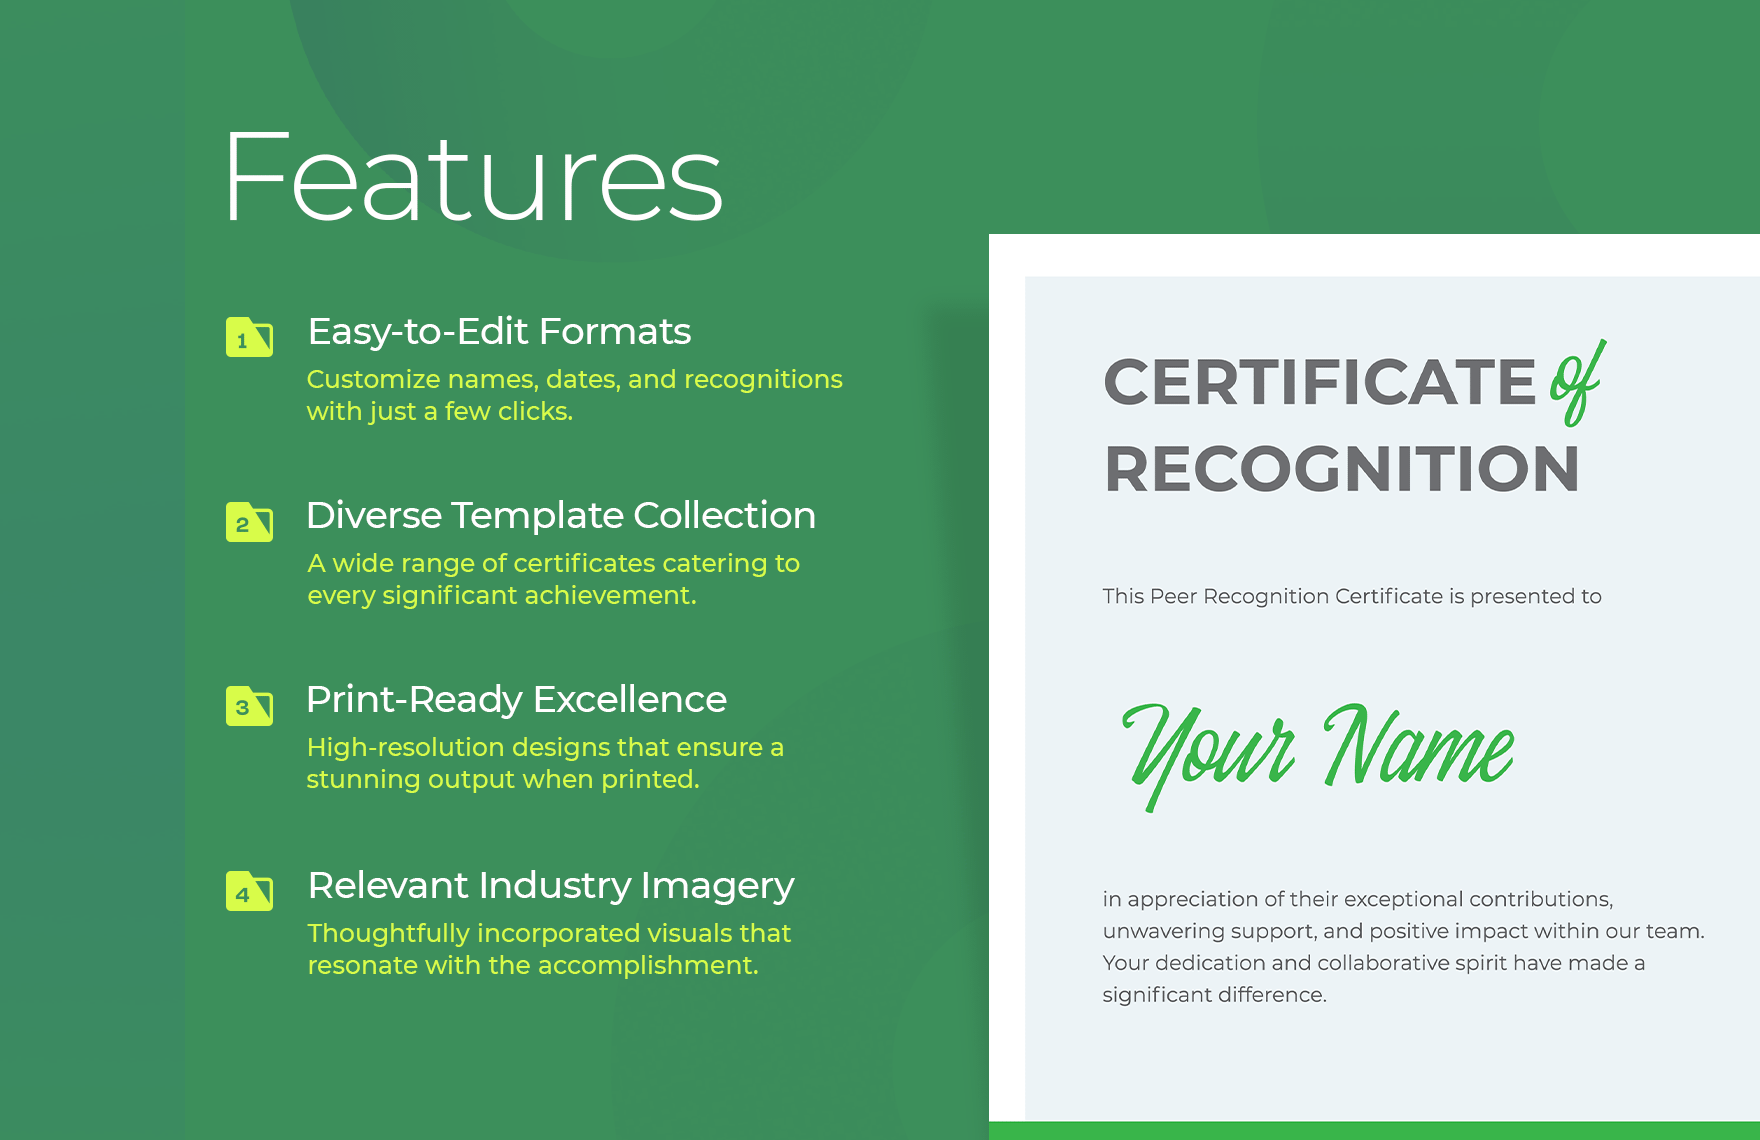 Peer Recognition Certificate HR Template